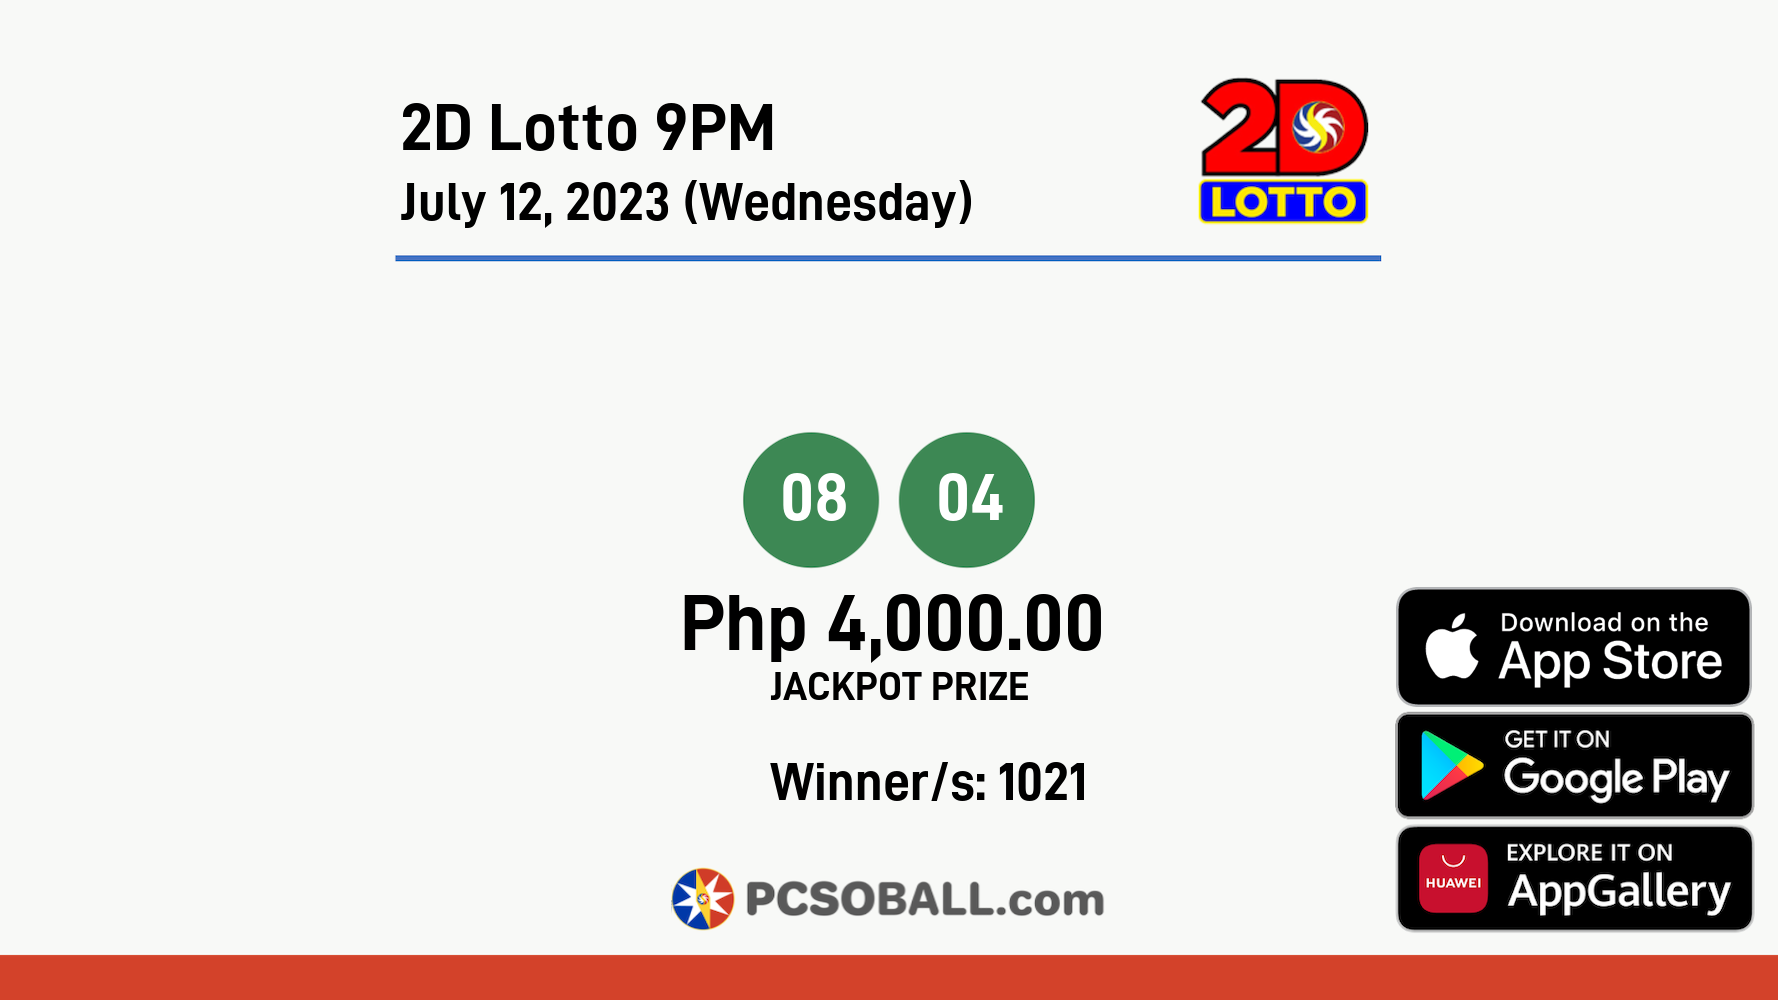 2D Lotto 9PM July 12, 2023 (Wednesday) Result